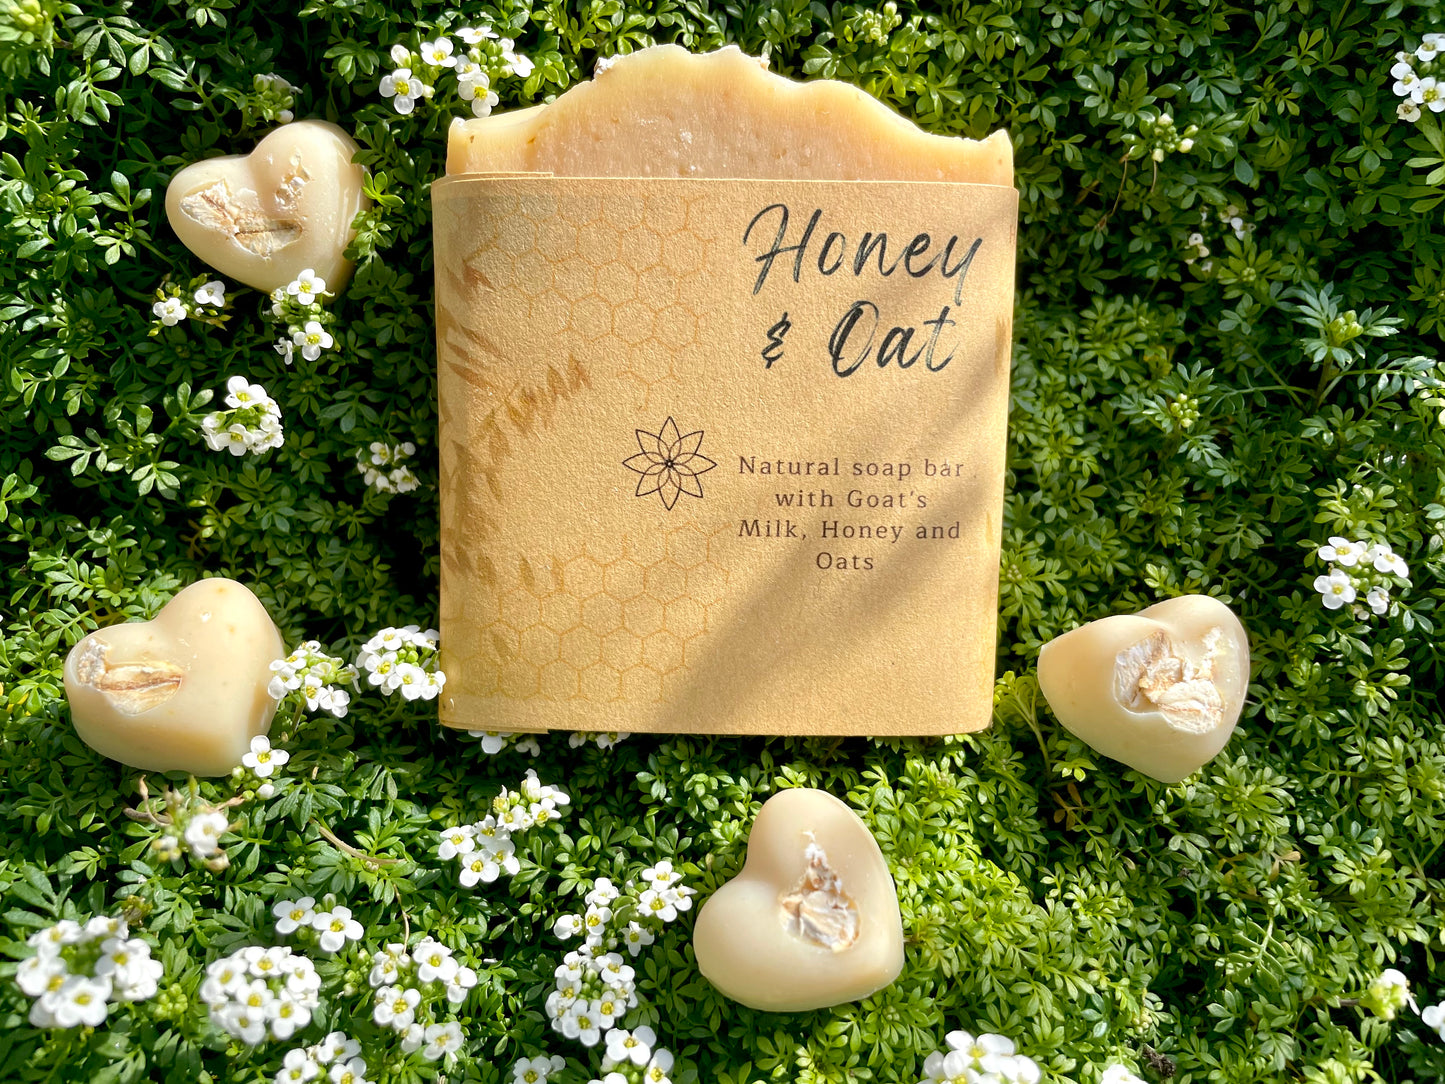 Honey and Oat handcrafted soap, showing the label and front side of the soap to appreciate the size of the bar, it has 4 mini soap samples of the same soap on a heart shape, all on a bed of wild flowers